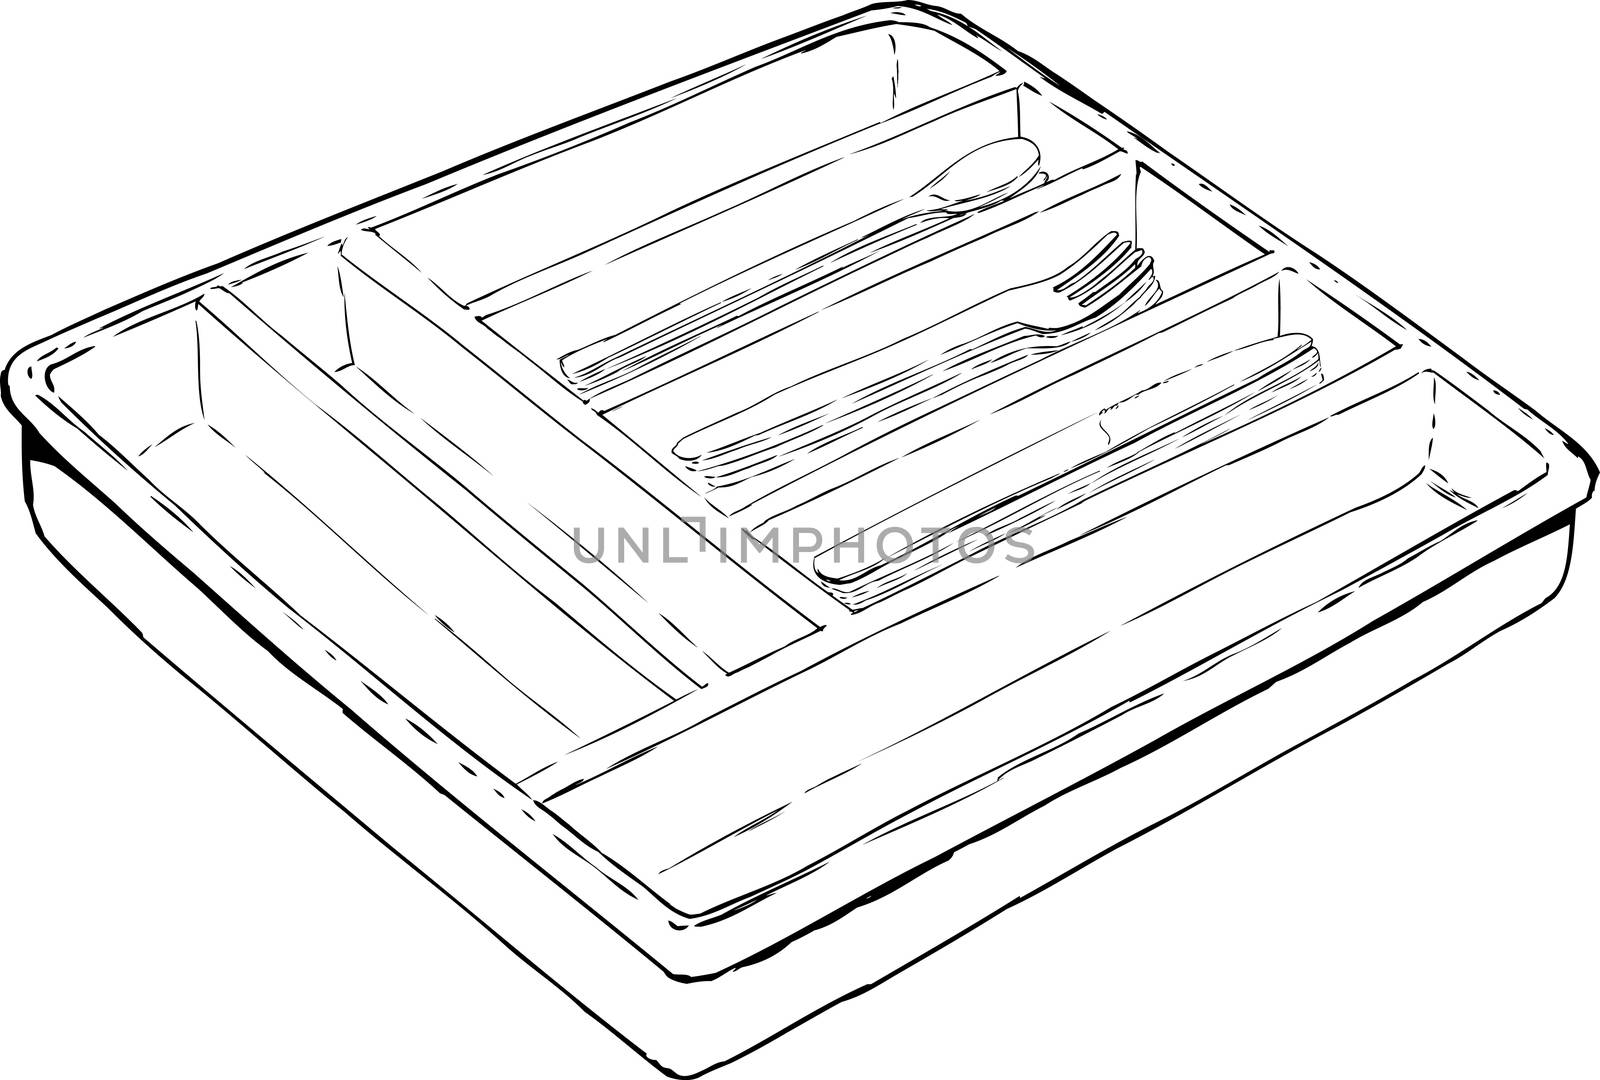 Outlined tray with spoons, forks and knives by TheBlackRhino